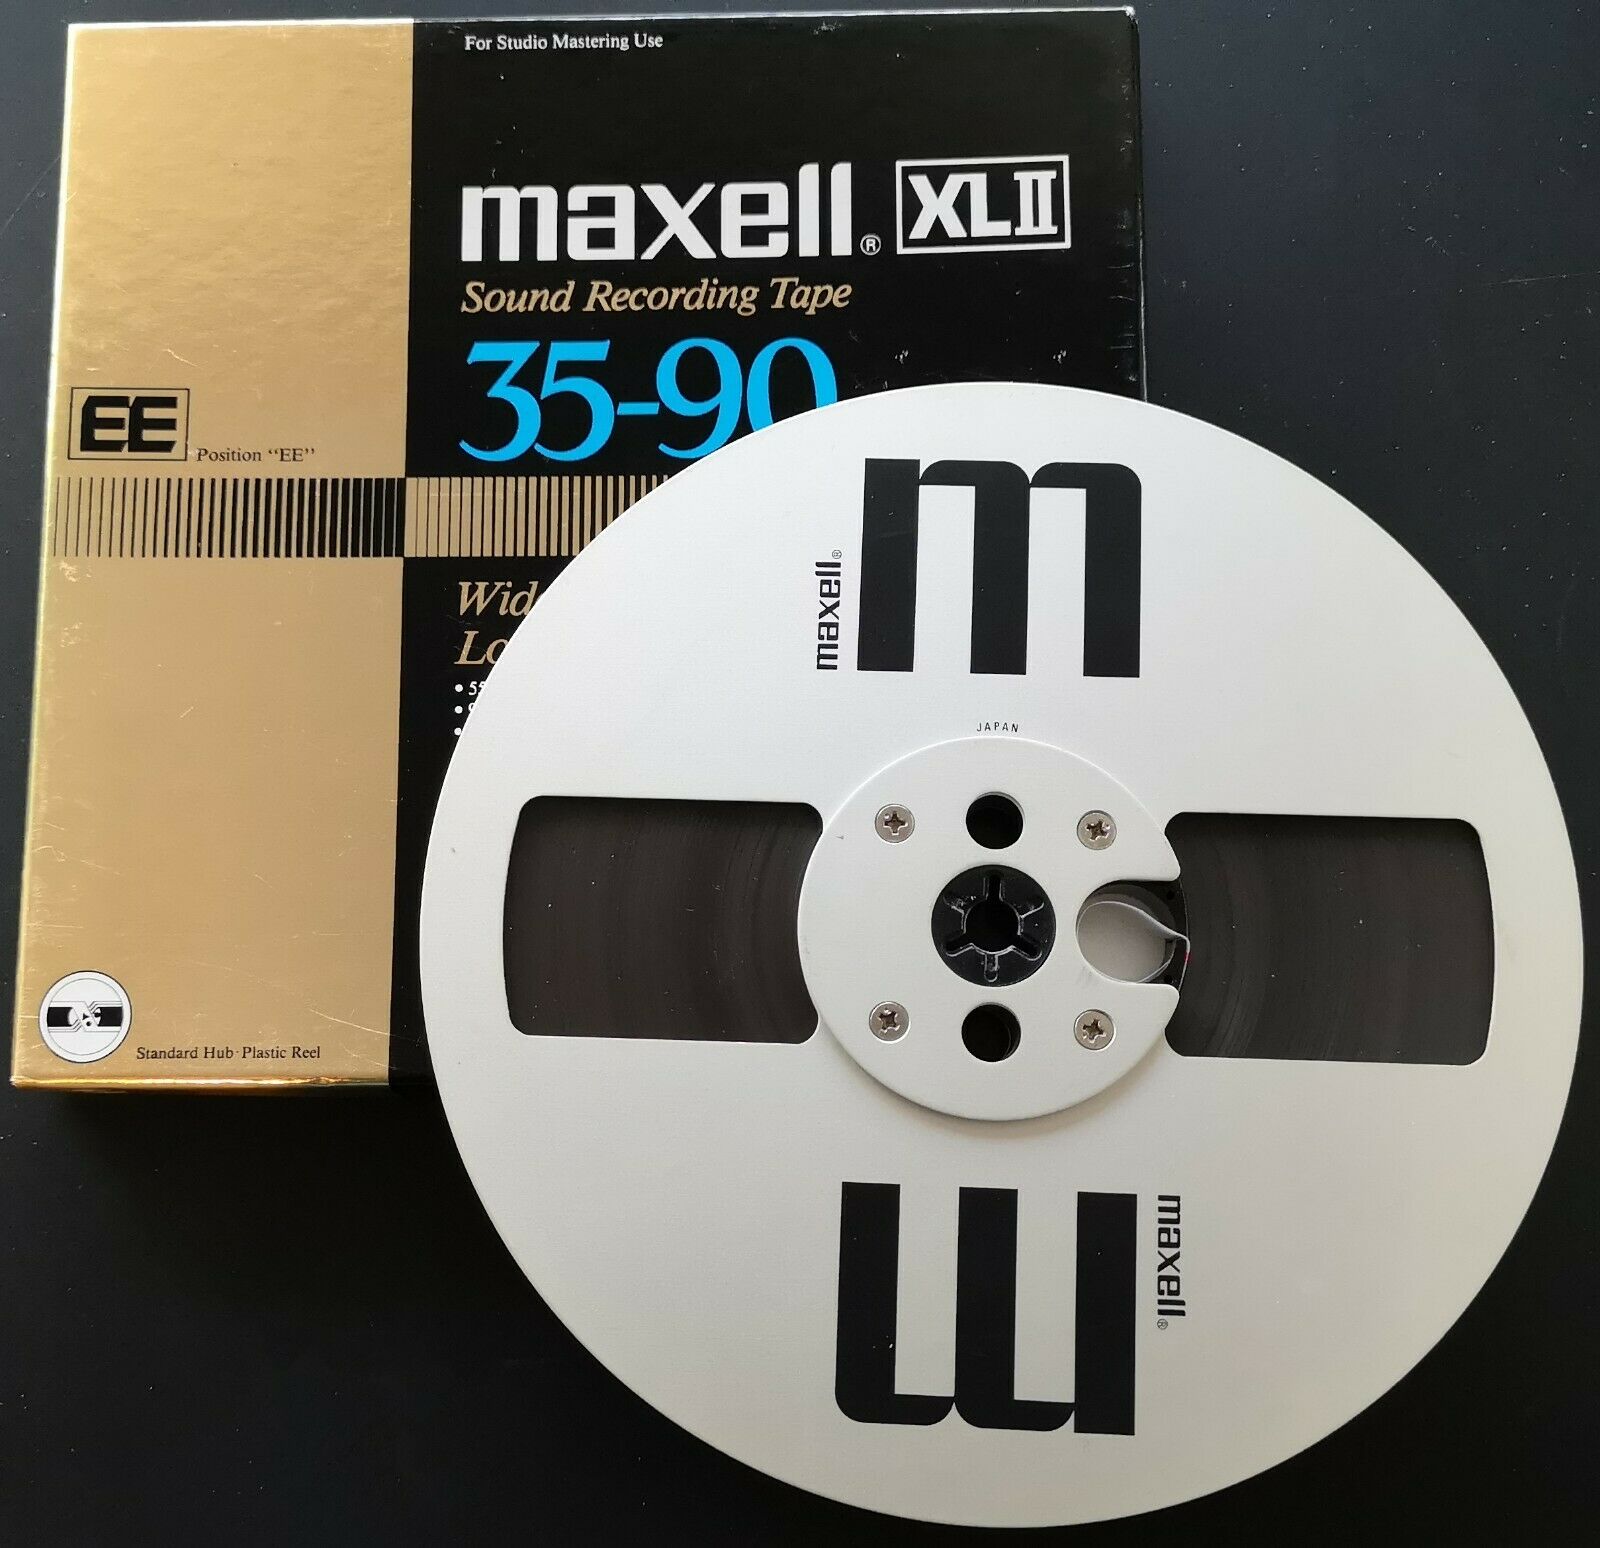 MAXELL XLII EE 35-90 On MR-7-inch Metal Take Up Reel To Reel Tape